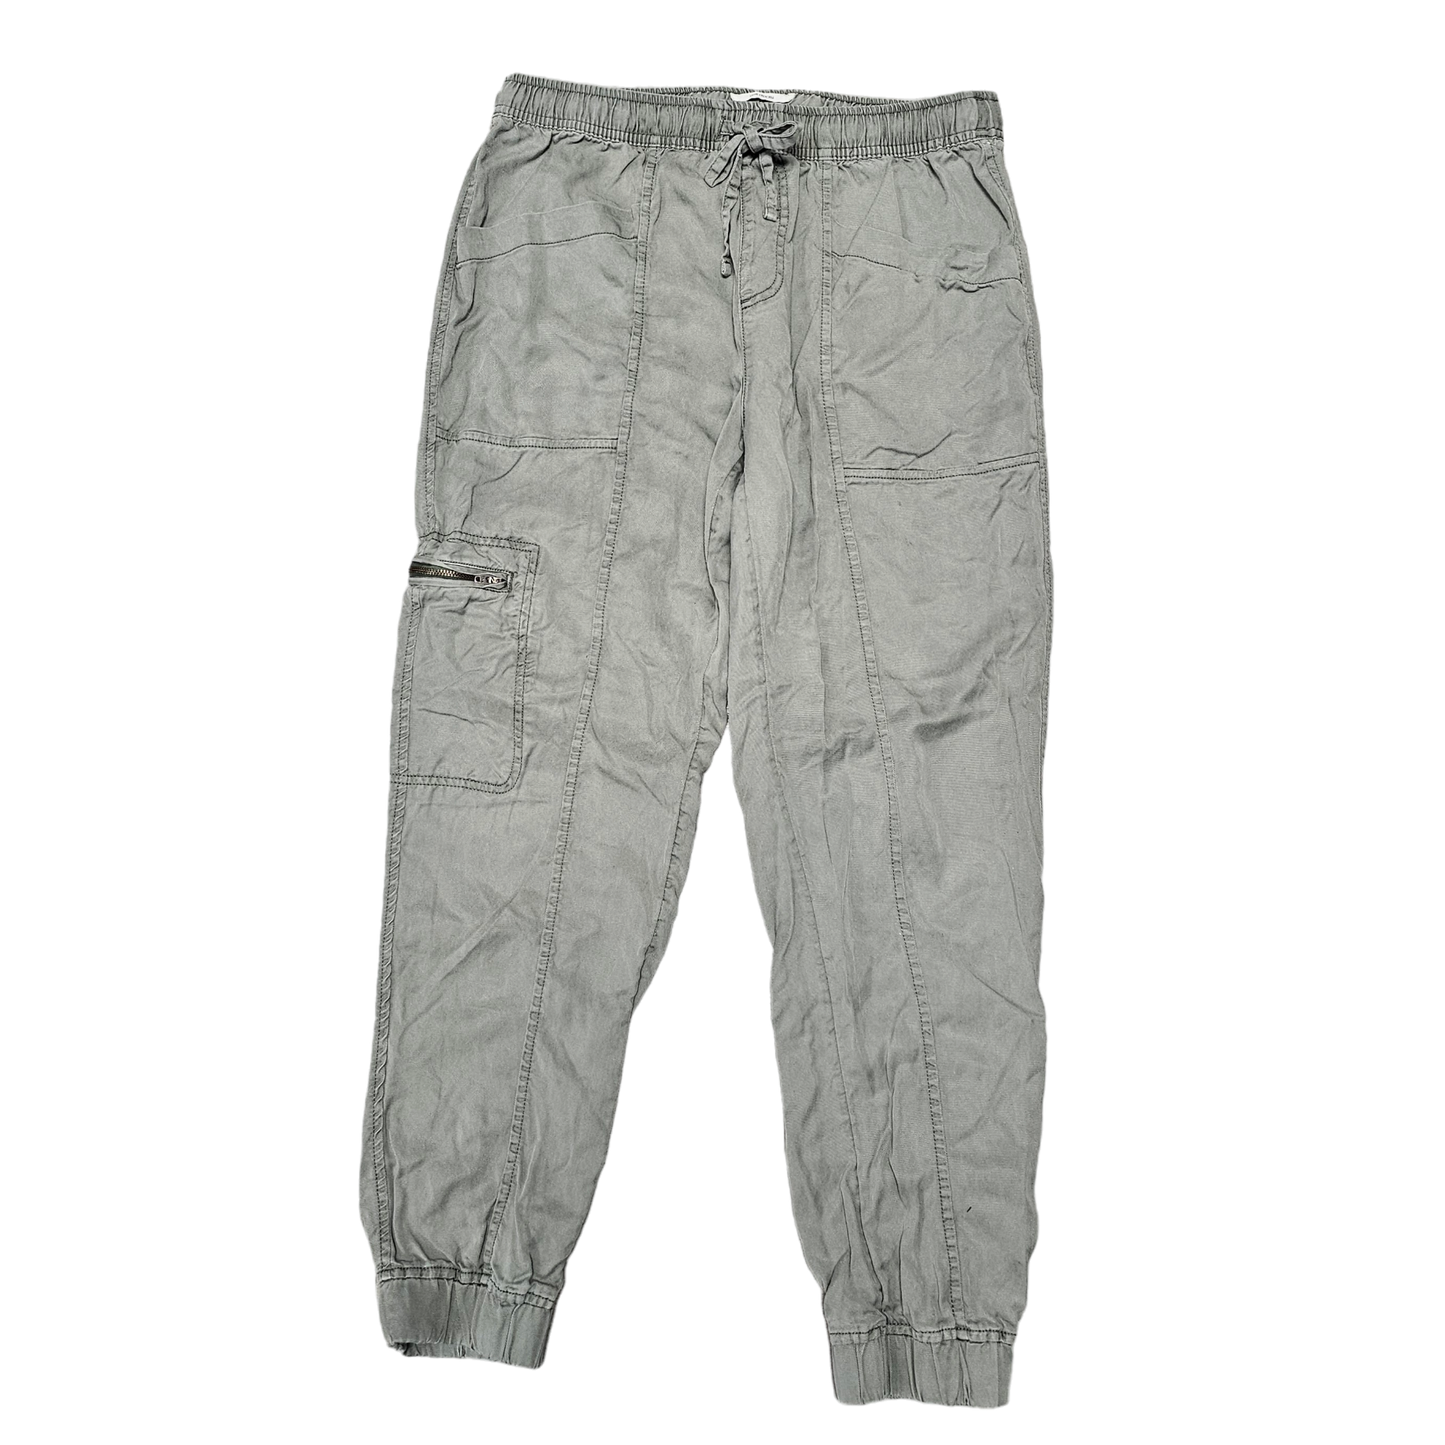 Pants Cargo & Utility By Nicole Miller  Size: L